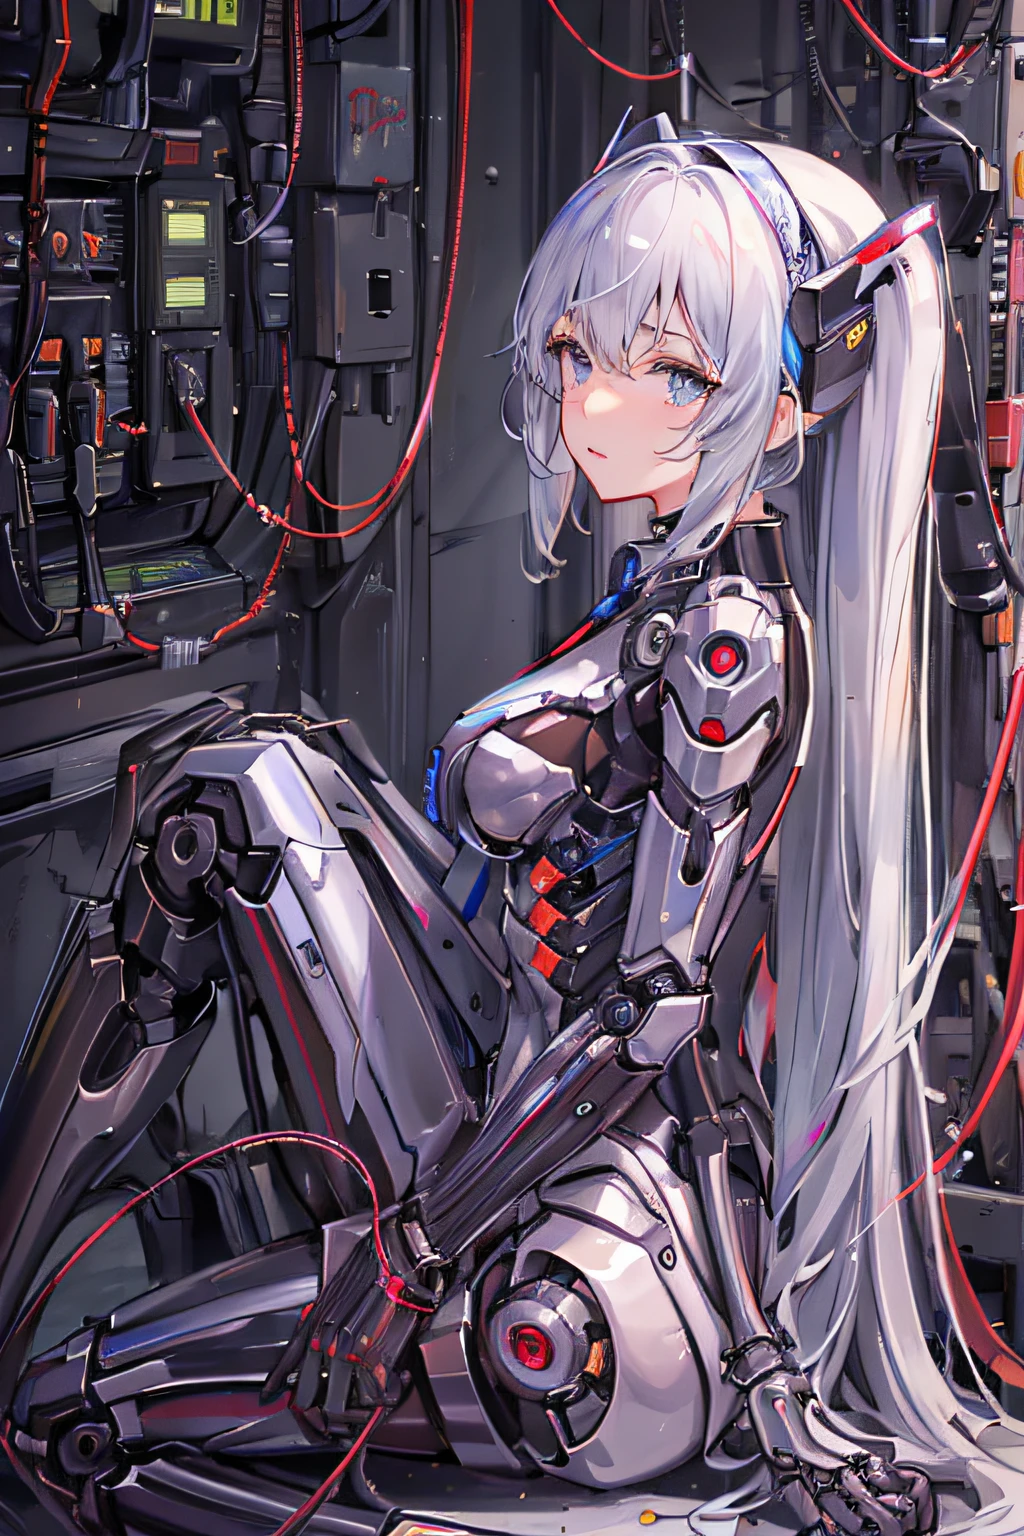 Anime 女の子 sitting on the ground with a robot in front of her, cyborg - 女の子 with silver hair, バイオメカニカルおっぱい, Cute cyborg 女の子, Cyborg 女の子, beautiful 女の子 cyborg, 完璧なアニメサイボーグ女性, perfect android 女の子, サイボーグ - 女の子, アニメ サイボーグ, beutiful white 女の子 cyborg, 完全にロボット!! 女の子, Cyberpunk anime 女の子 mecha